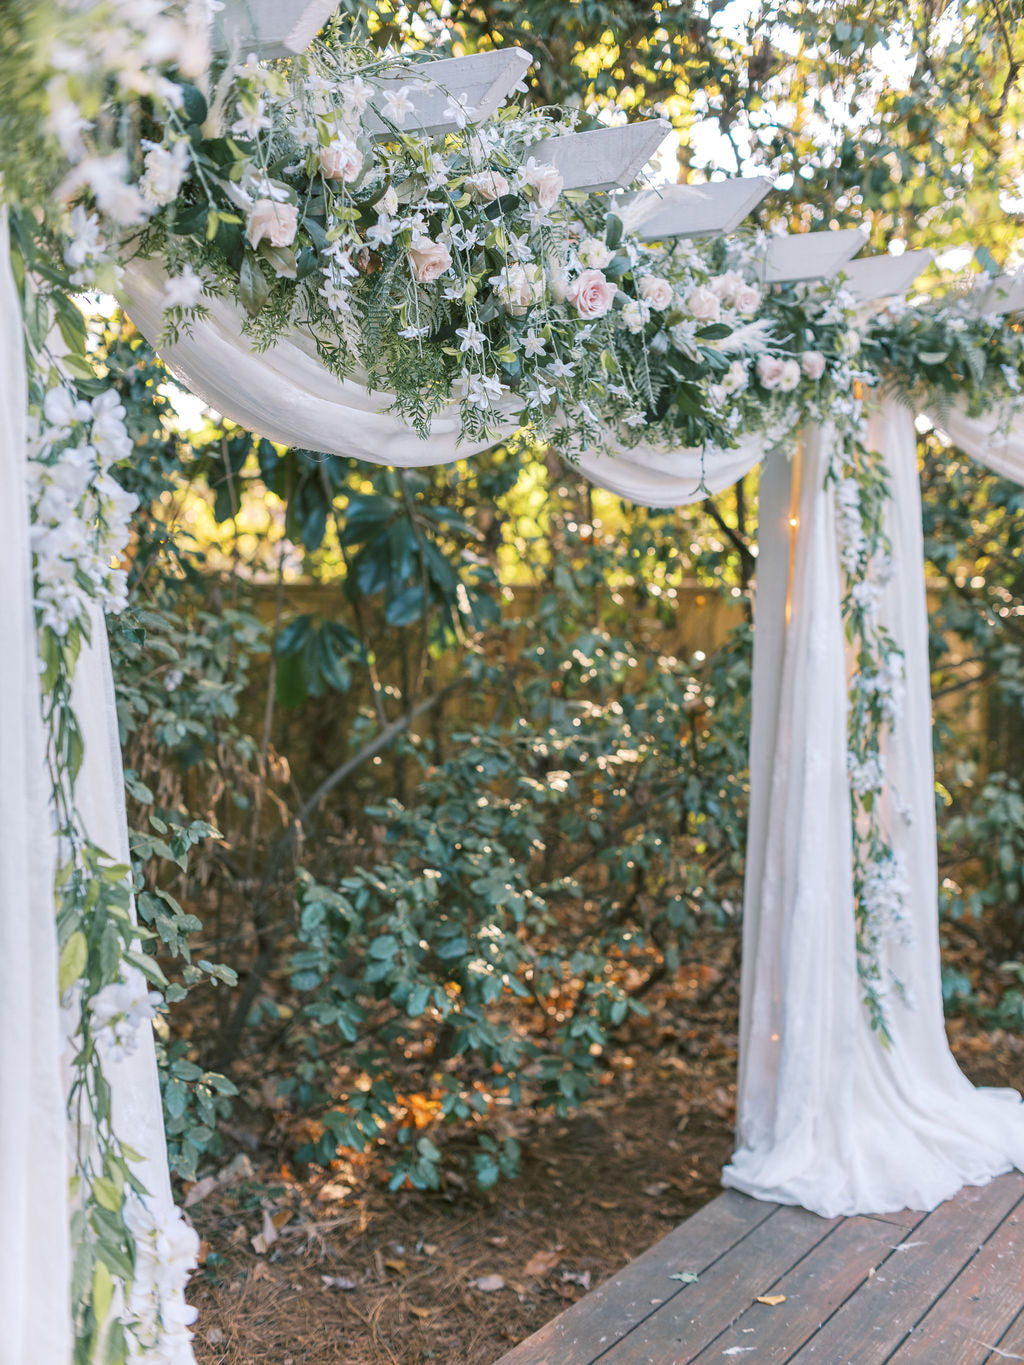 garden wedding altar with white drapes, greenery, and white and blush flowers